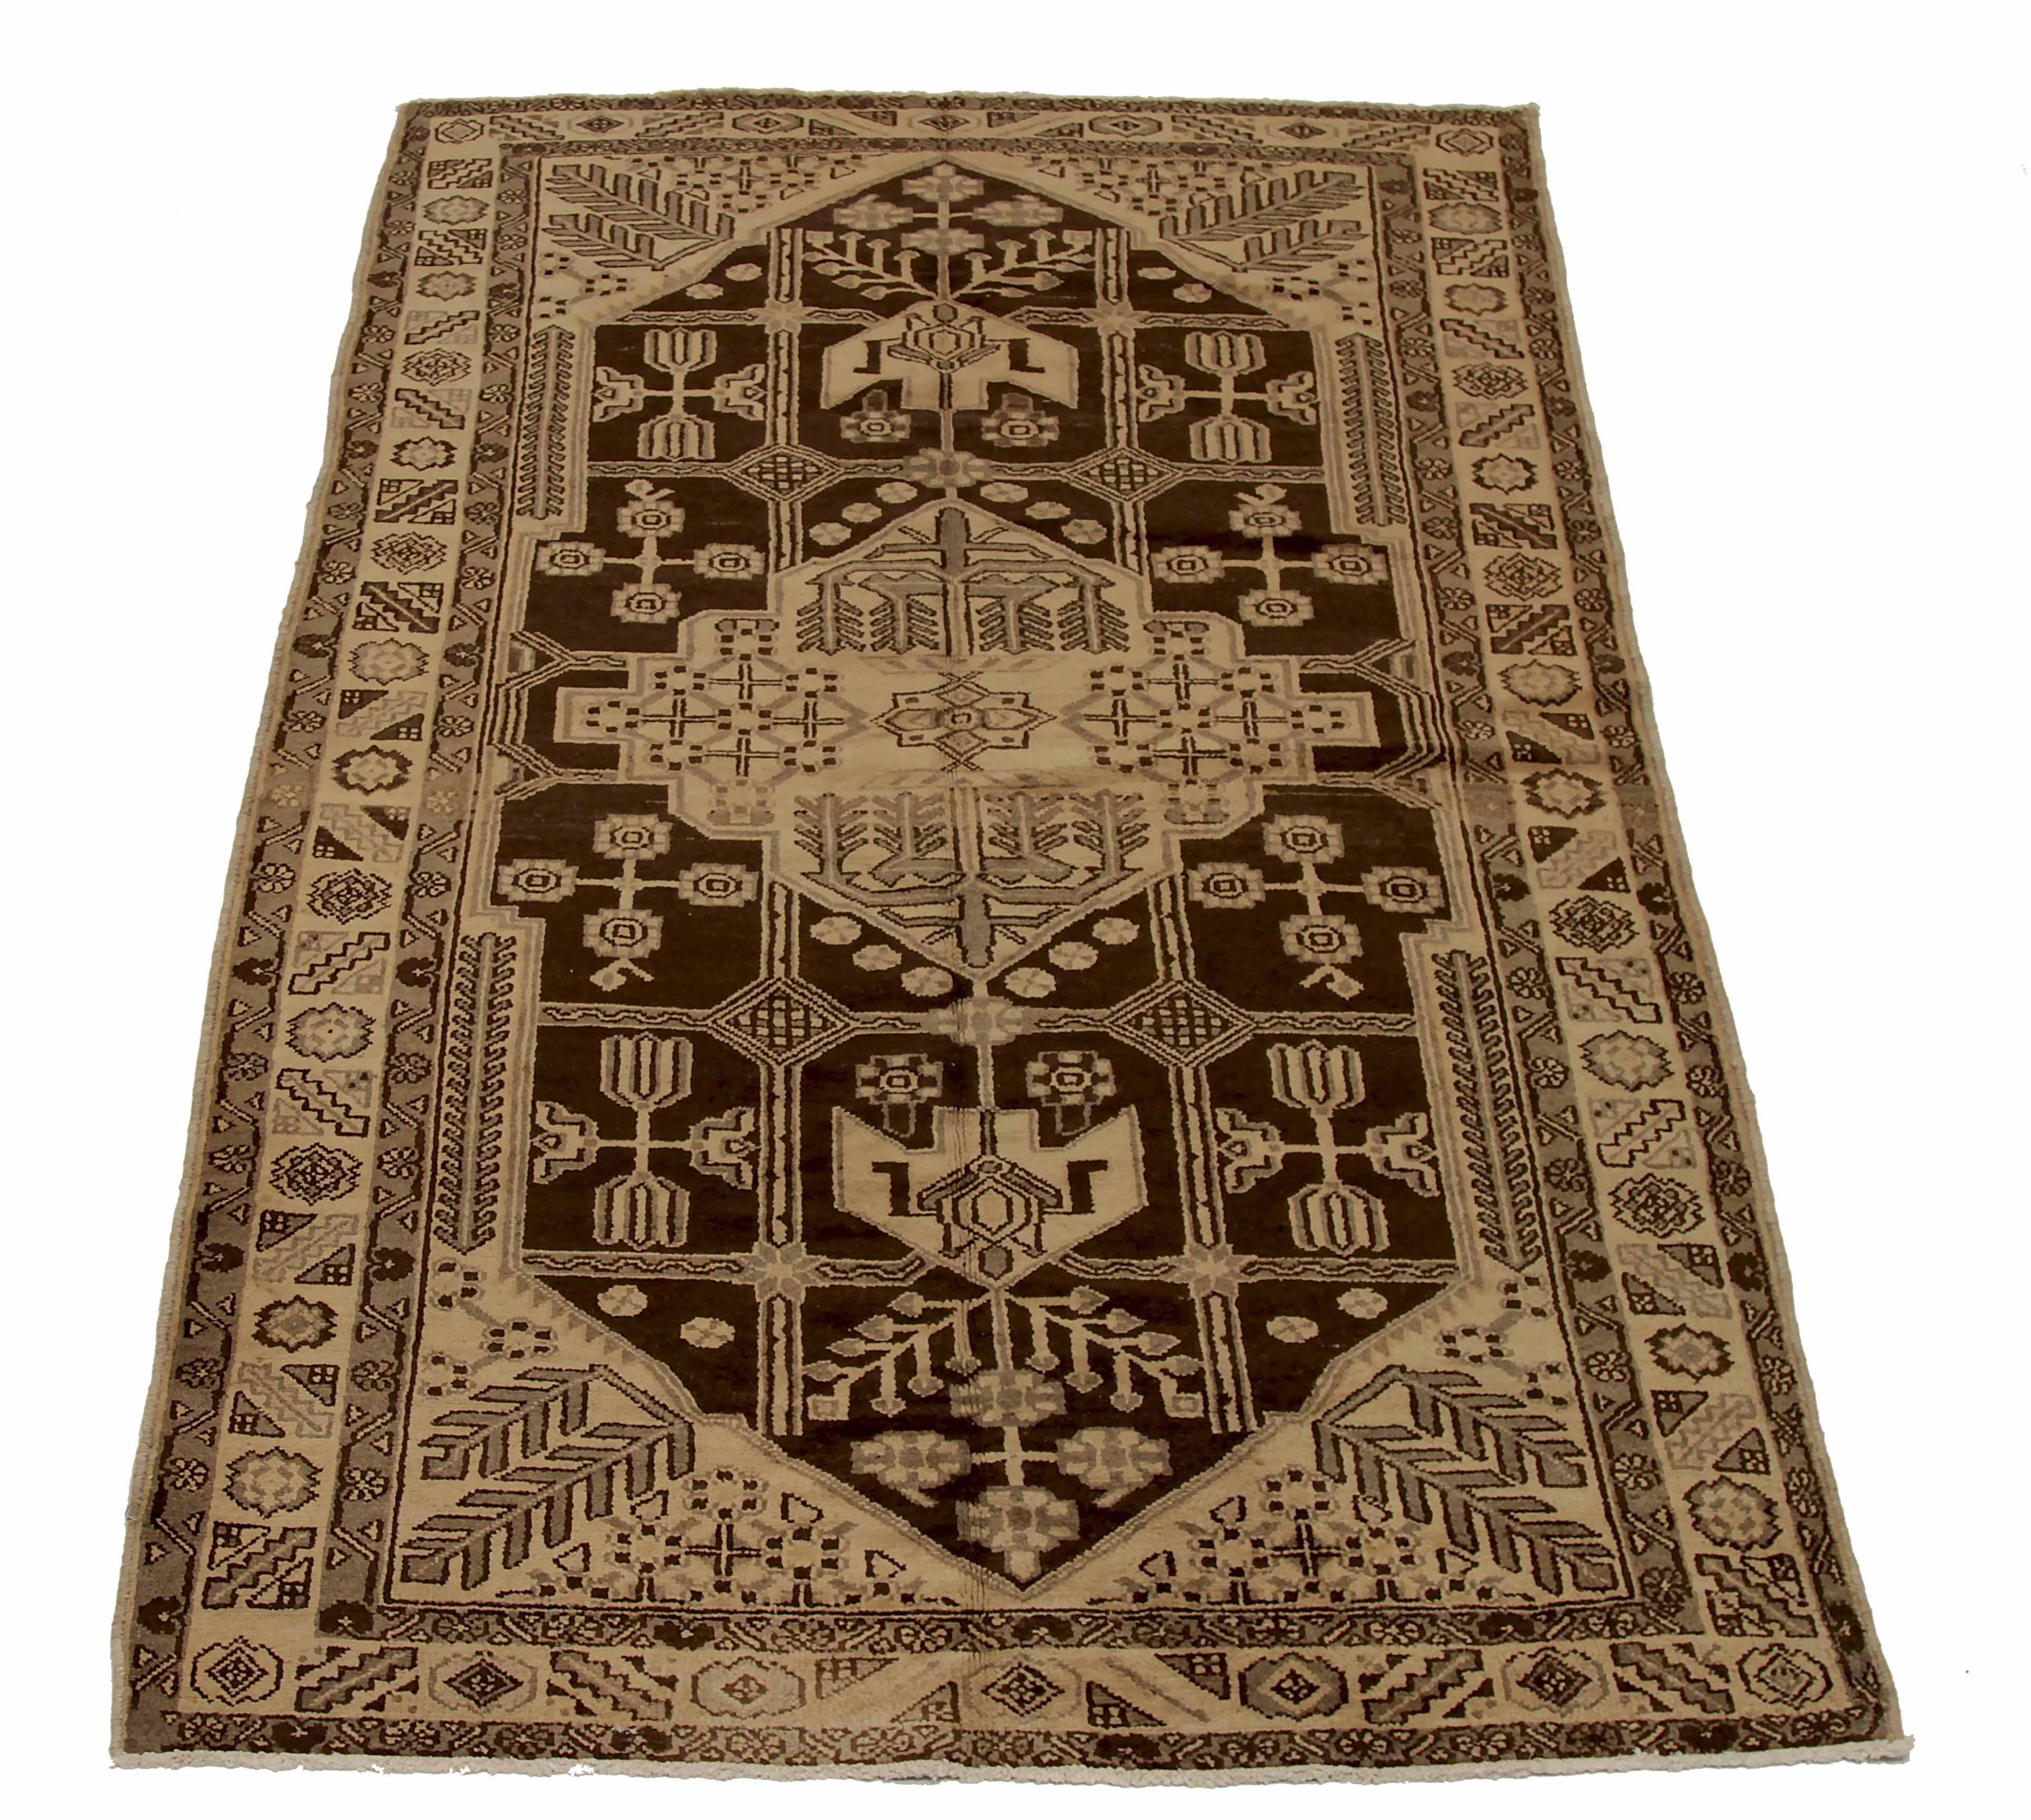 Antique Persian area rug handwoven from the finest sheep’s wool. It’s colored with all-natural vegetable dyes that are safe for humans and pets. It’s a traditional Shahsavan design handwoven by expert artisans. It’s a lovely area rug that can be